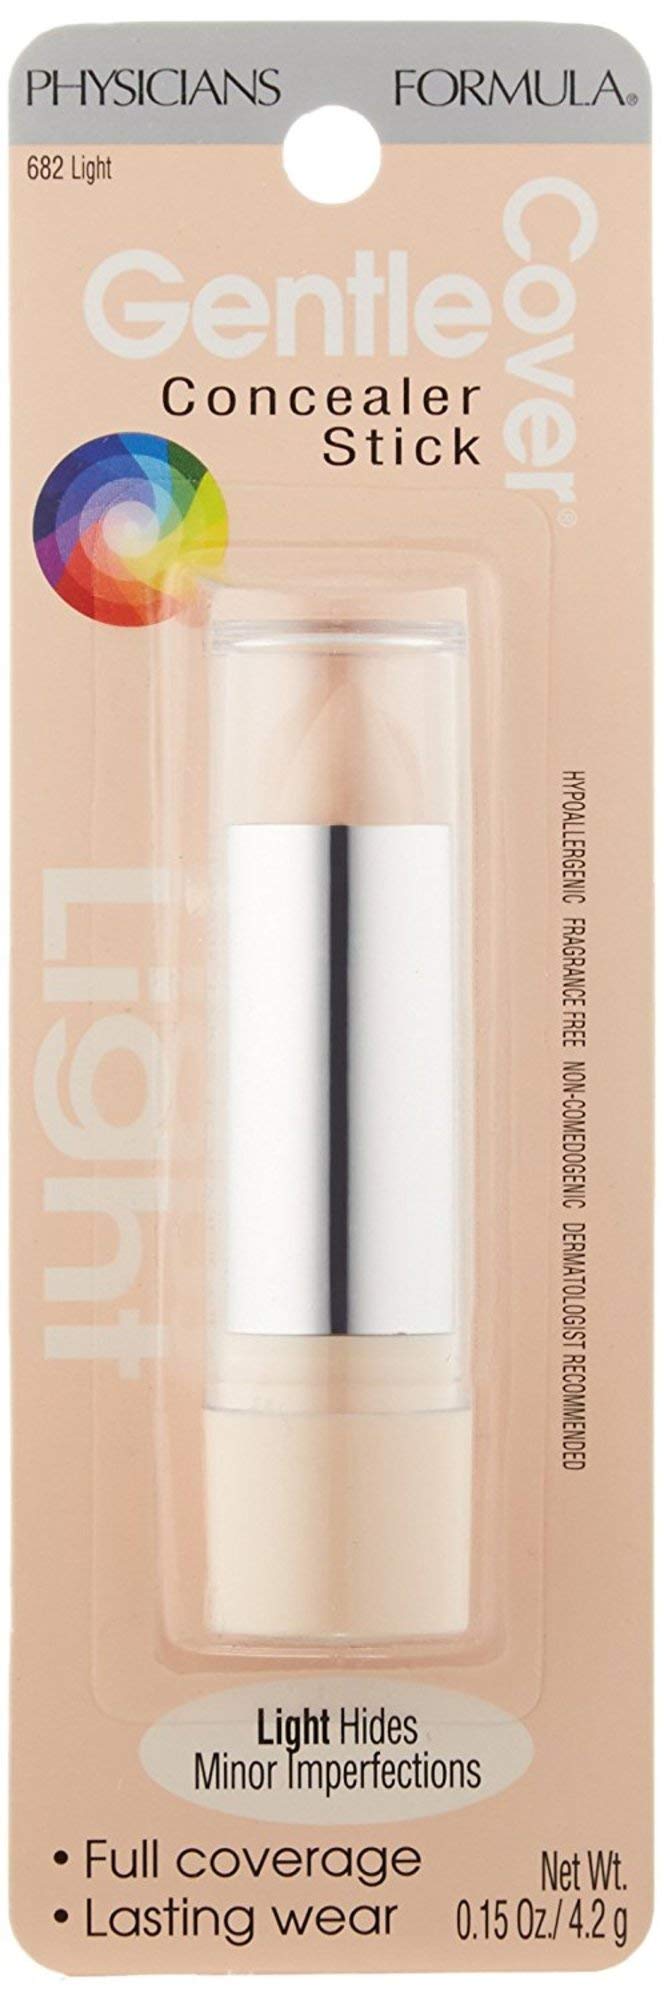 Physicians Formula Gentle Full Coverage Concealer, Light Cover Concealer Stick, Eyes, Face, Dermatologist Tested (Packaging May Vary)